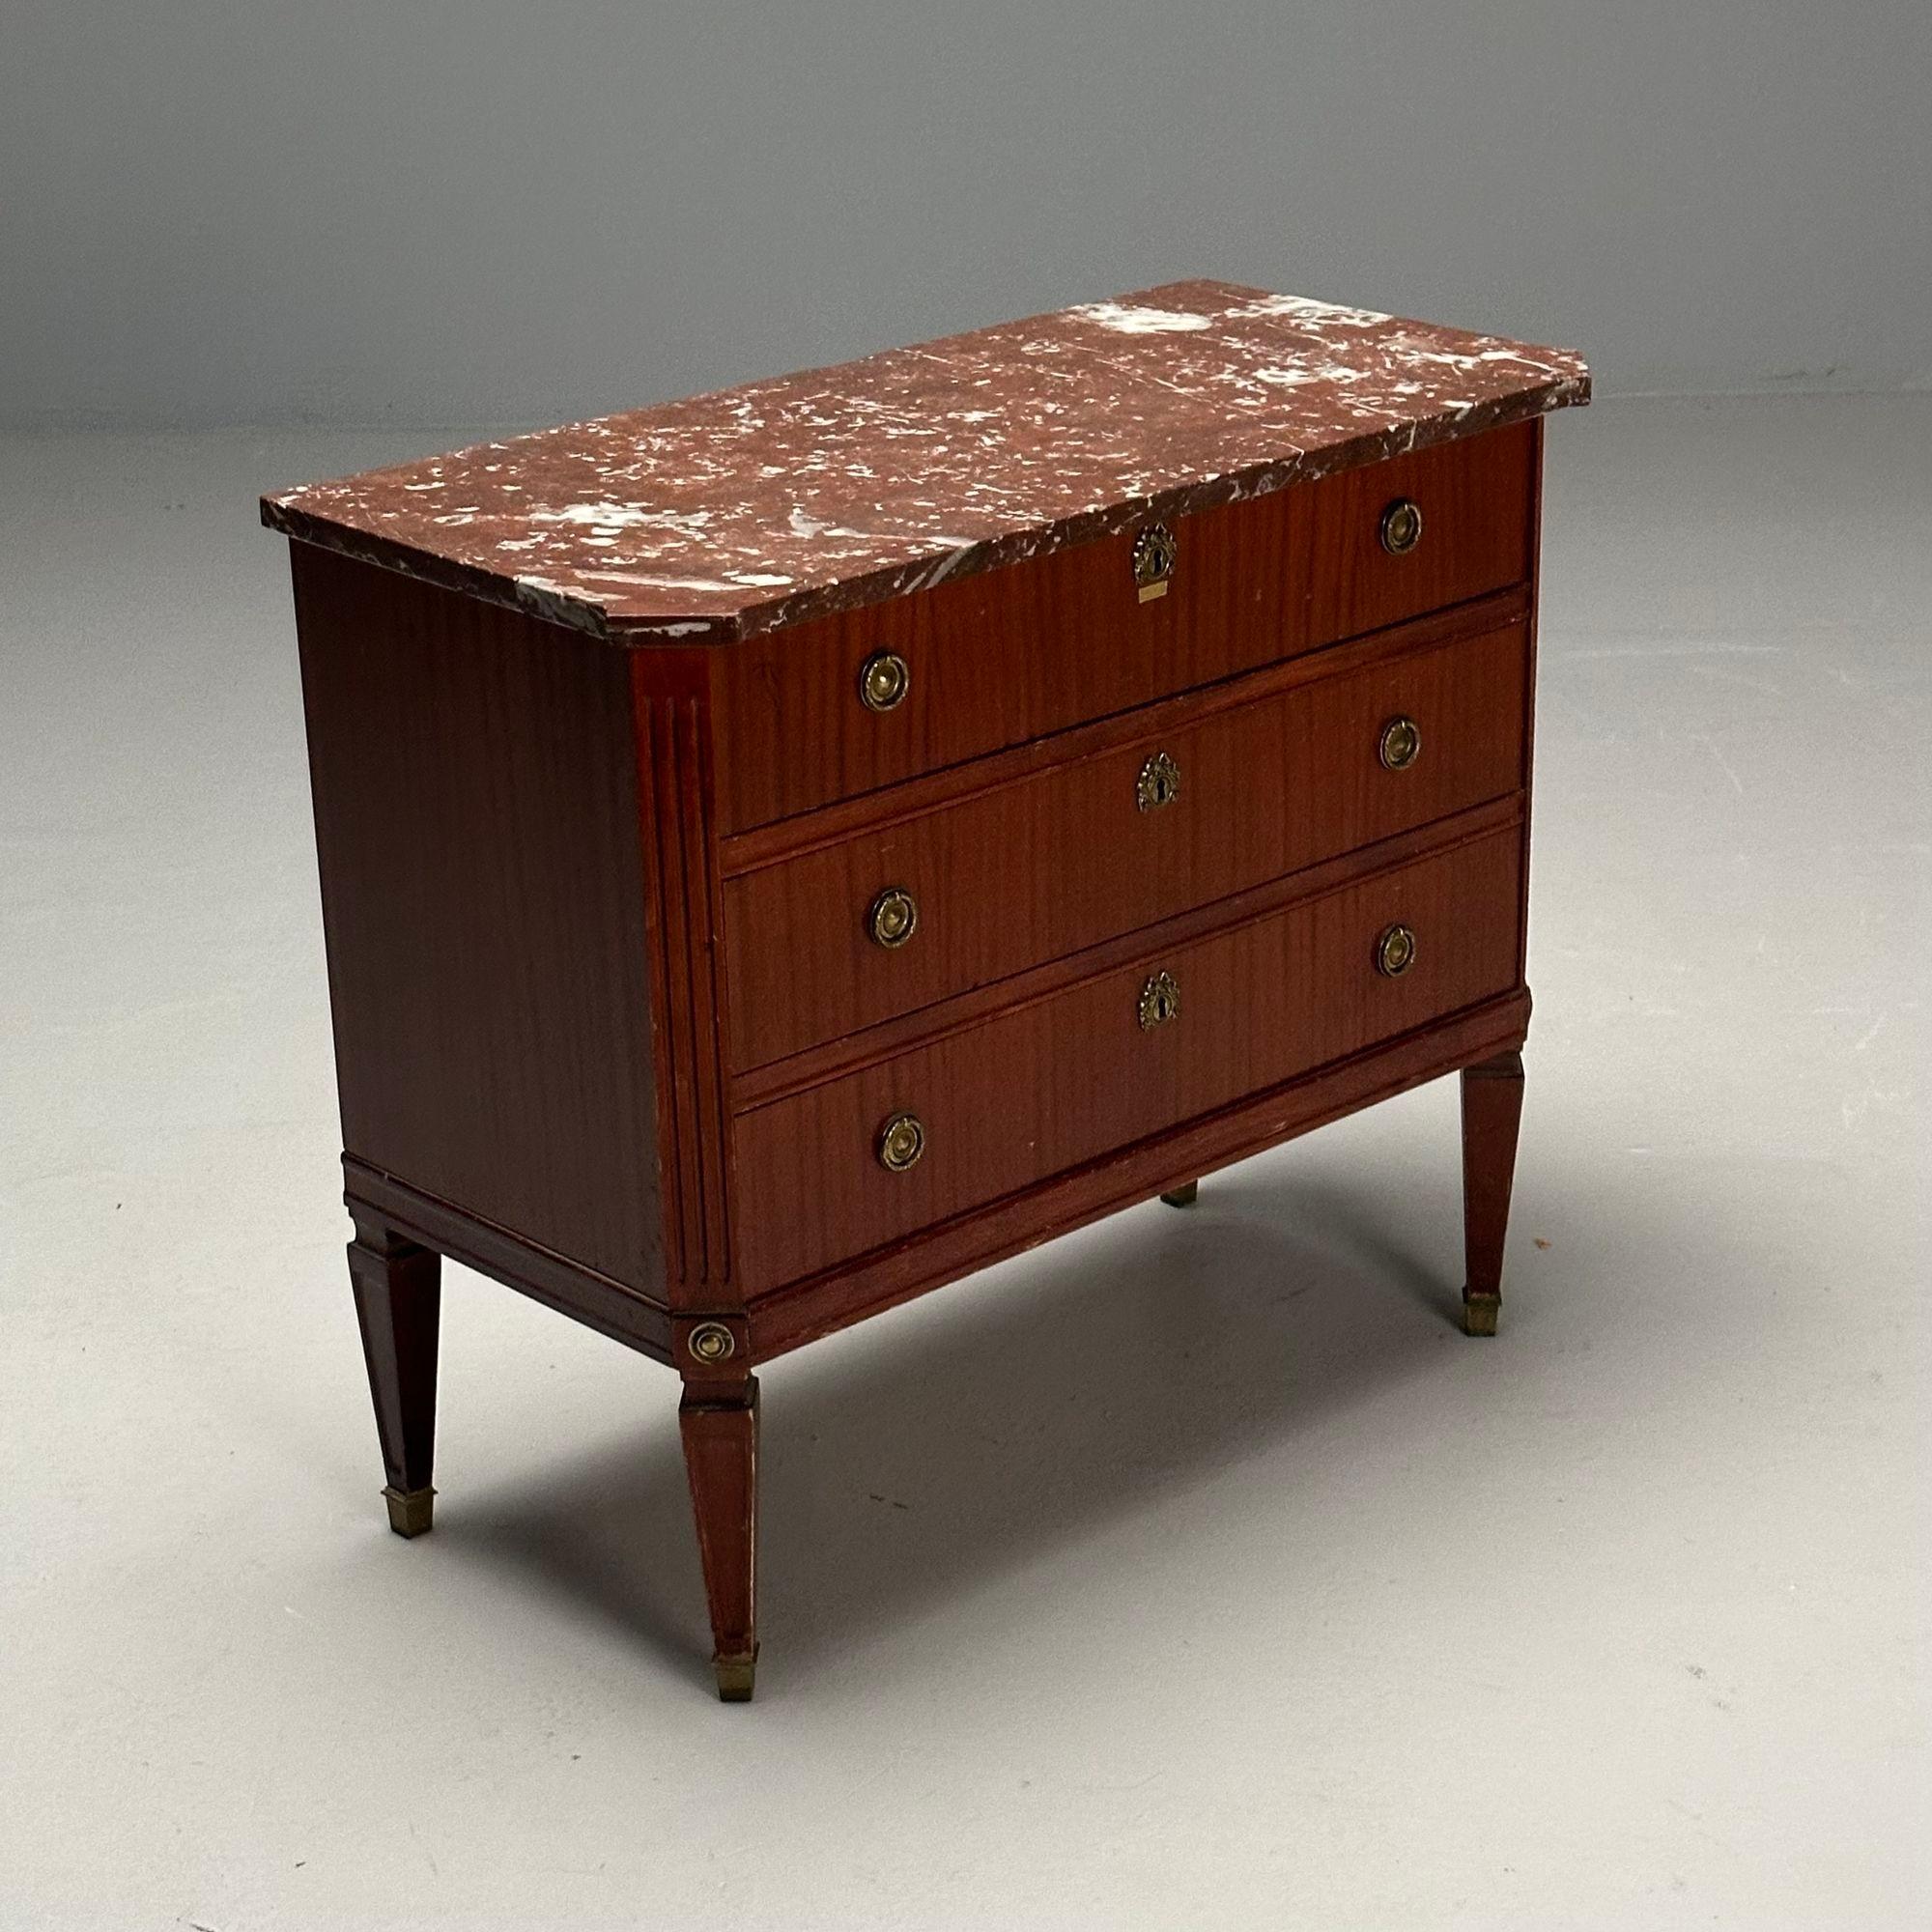 Gustavian, Louis XVI Style, Swedish Commode, Mahogany, Marble, Sweden, 1950s

Gustavian dresser or chest of drawers designed and produced in Sweden circa 1950s. This example features a pinned marble on top of a mahogany veneered cabinet, three